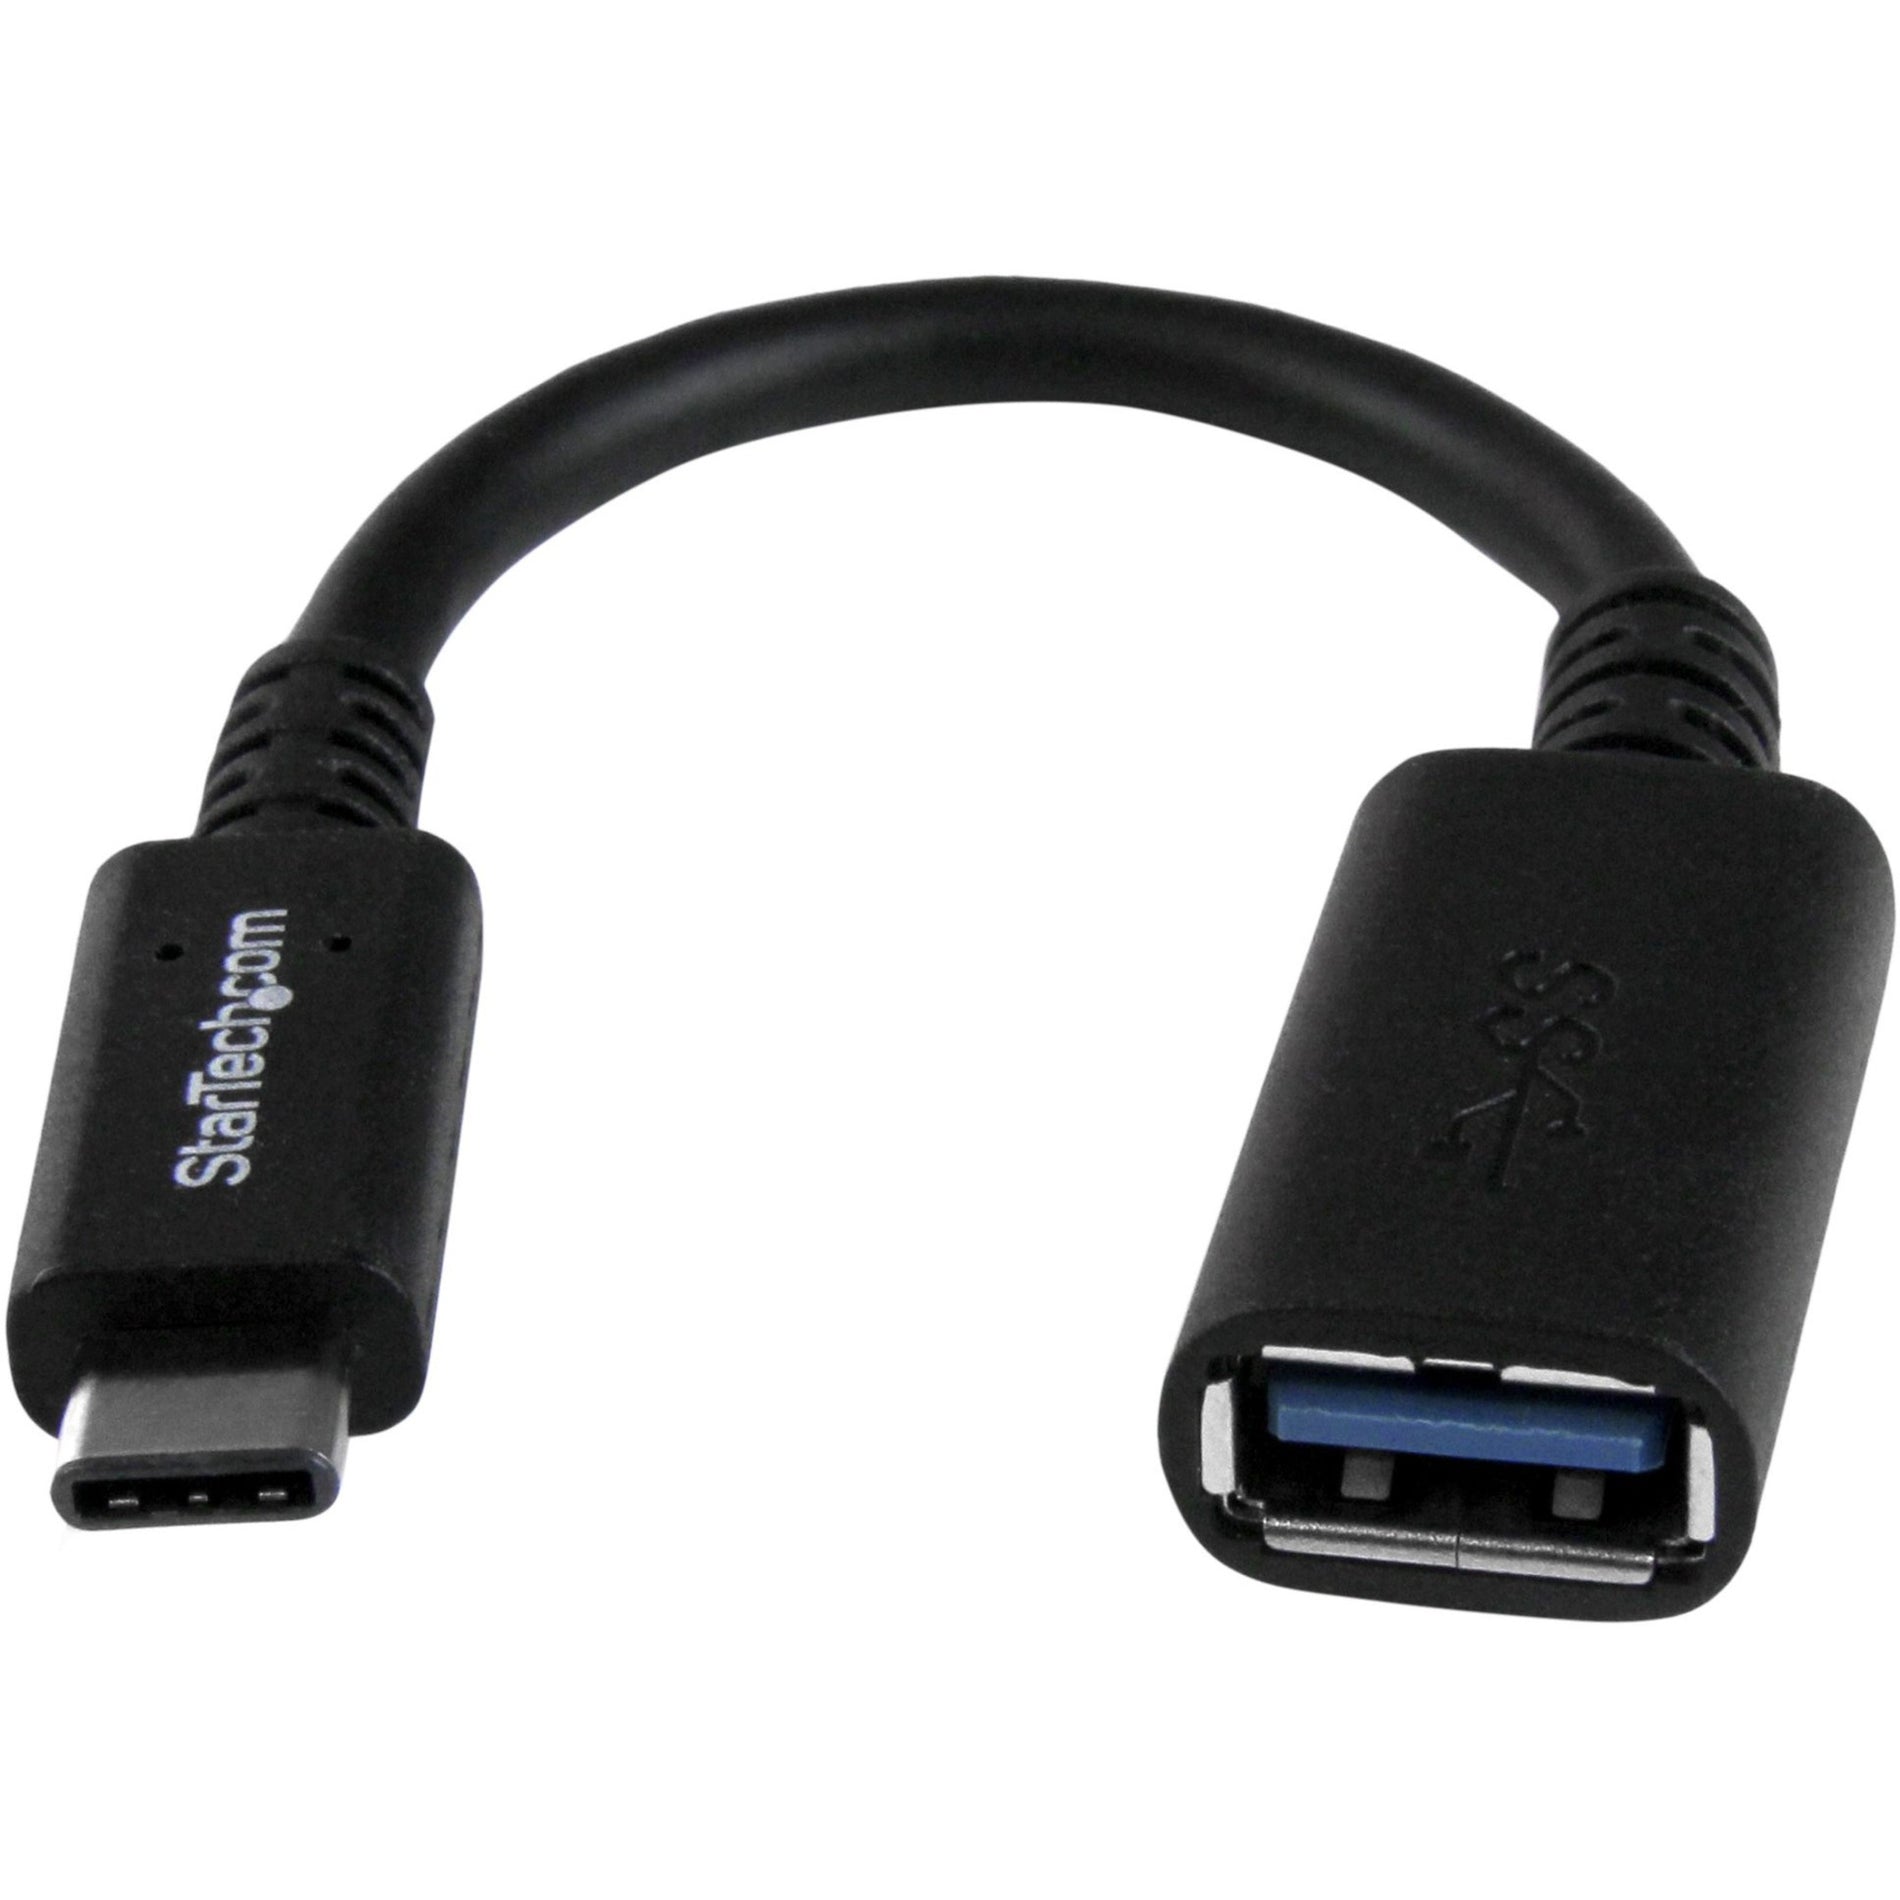 StarTech.com USB31CAADP USB-C to USB-A Adapter Cable - M/F - 6in, USB 3.0, USB-IF Certified